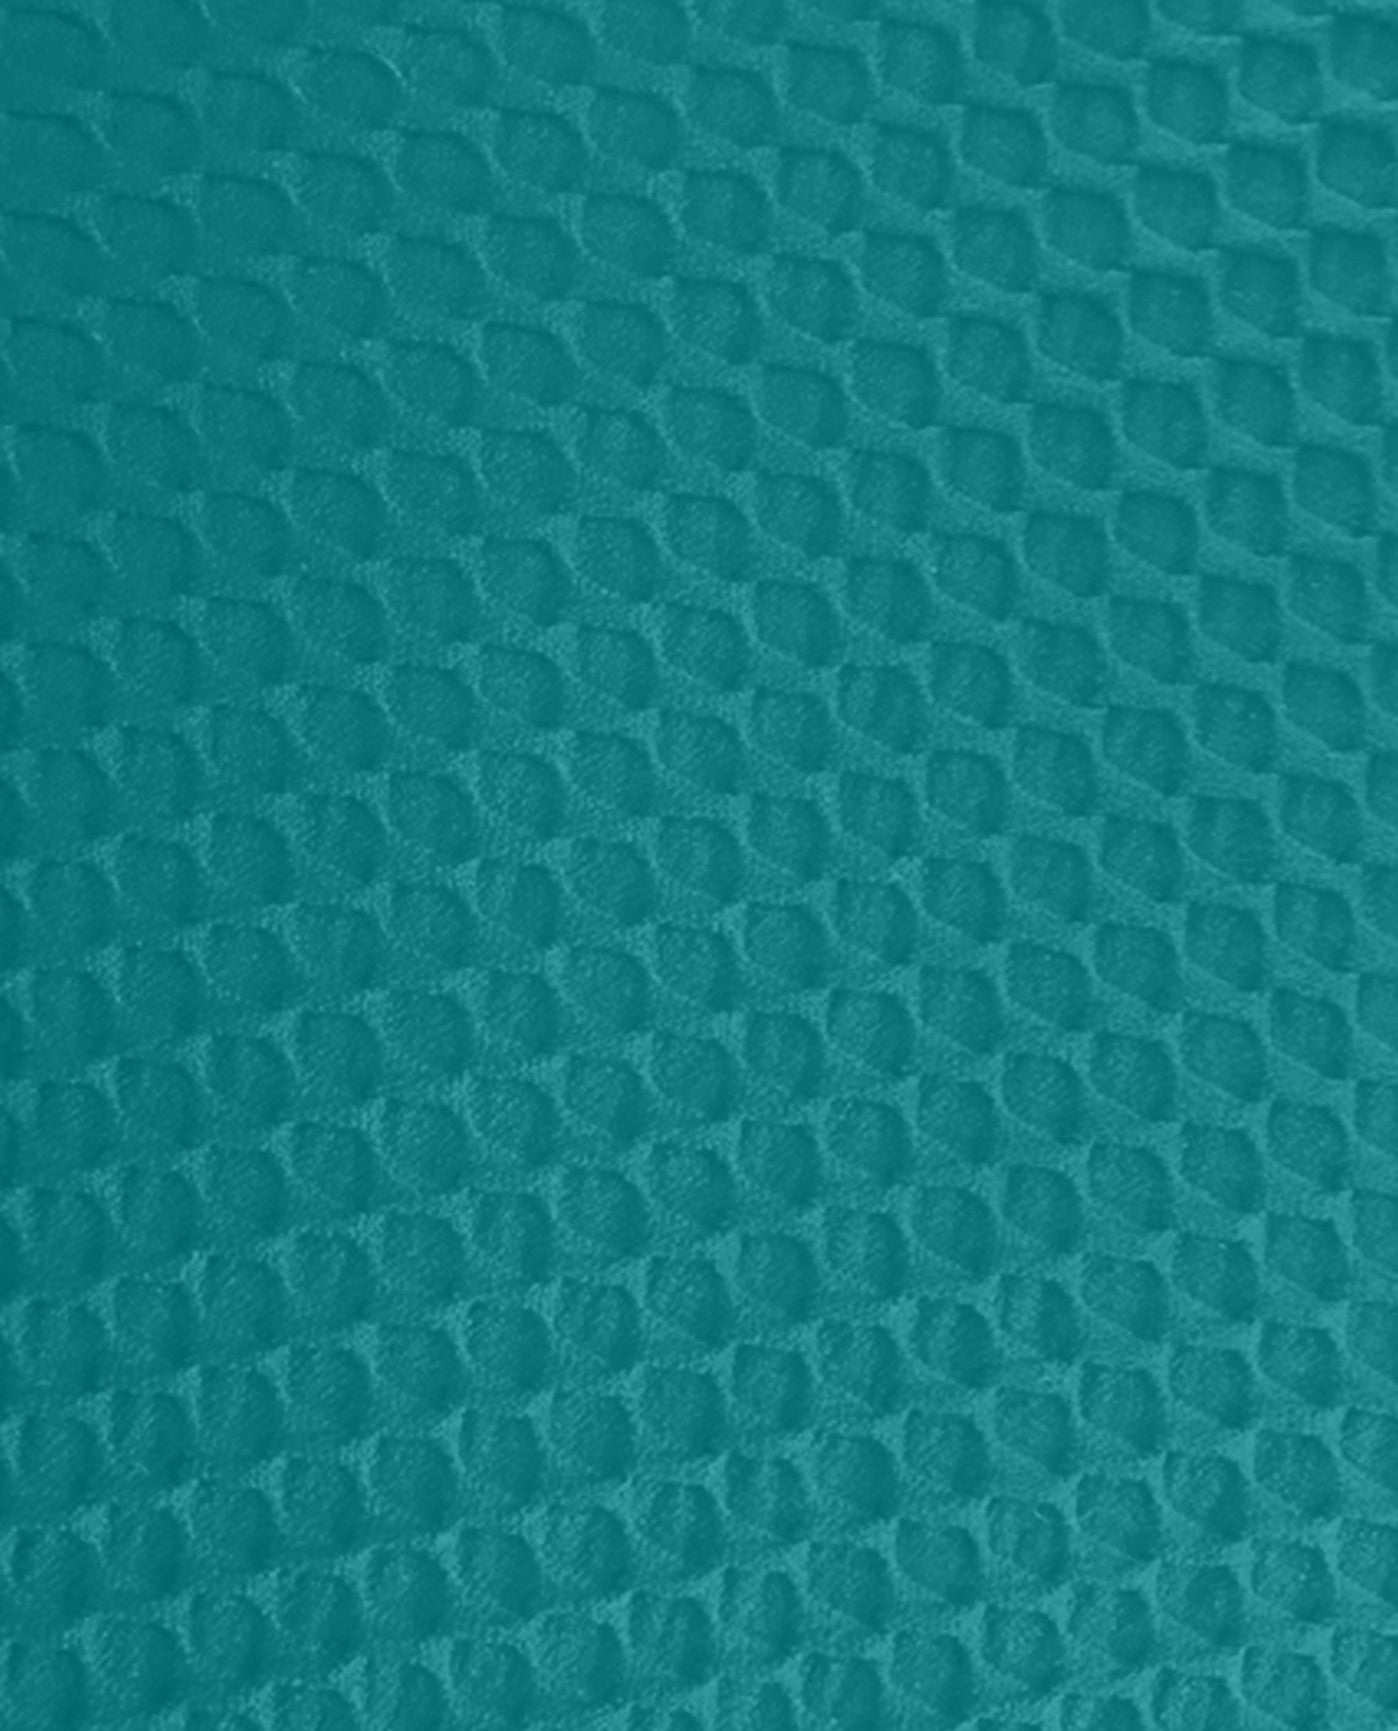 FABRIC SWATCH VIEW OF CHLORINE RESISTANT AQUAMORE SOLID TEXTURED SHIRRED FRONT ONE PIECE SWIMSUIT | 506 AQT TEXTURED JADE